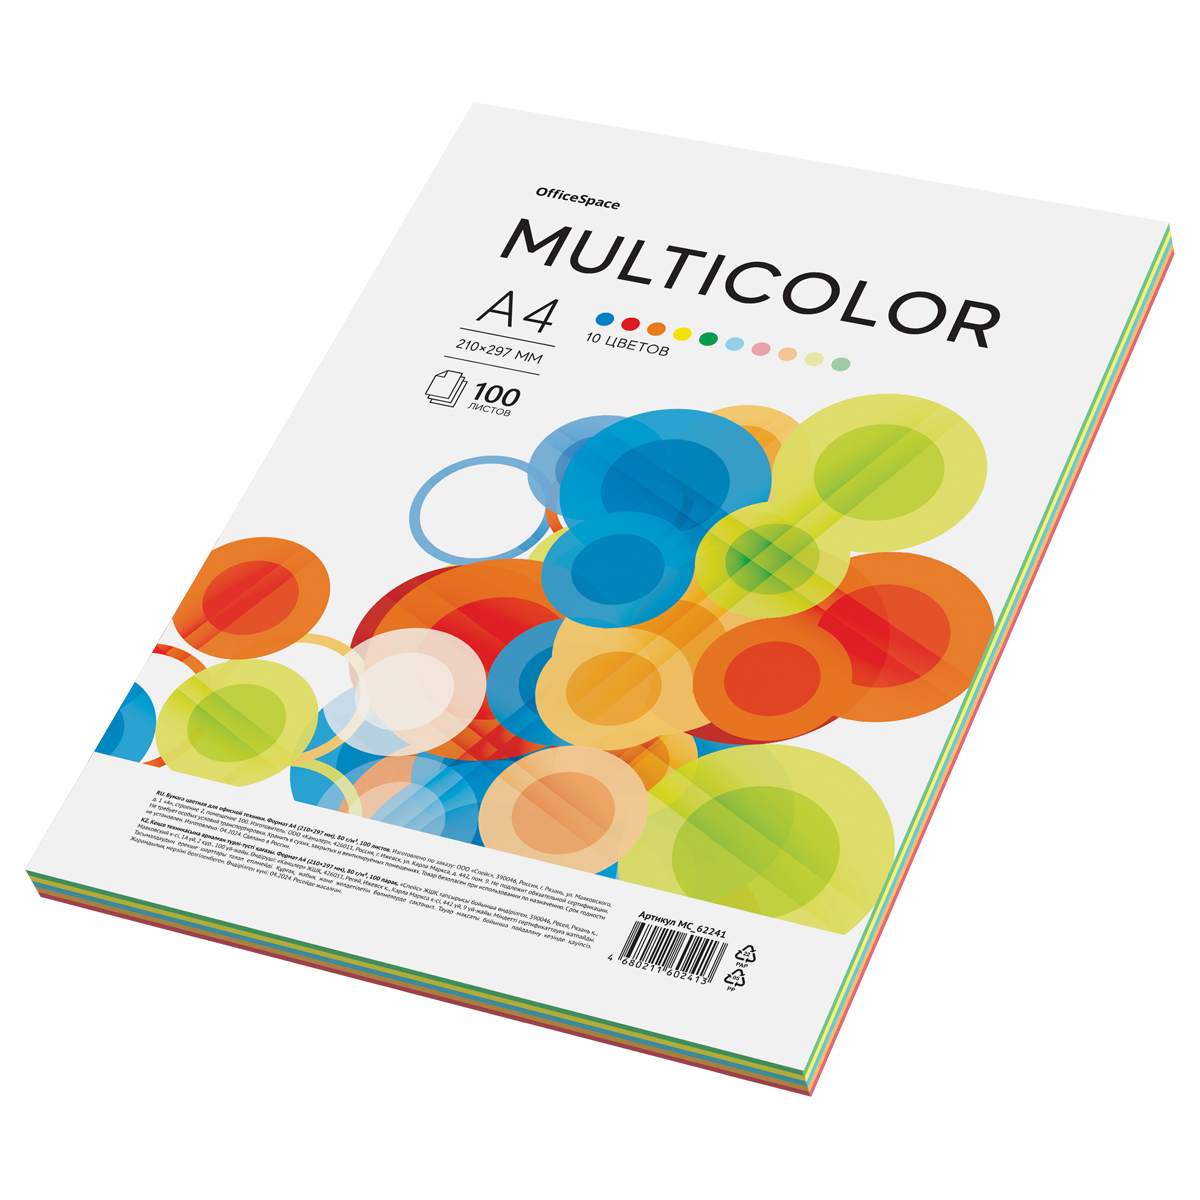   OfficeSpace "Multicolor", 4, 80/ 